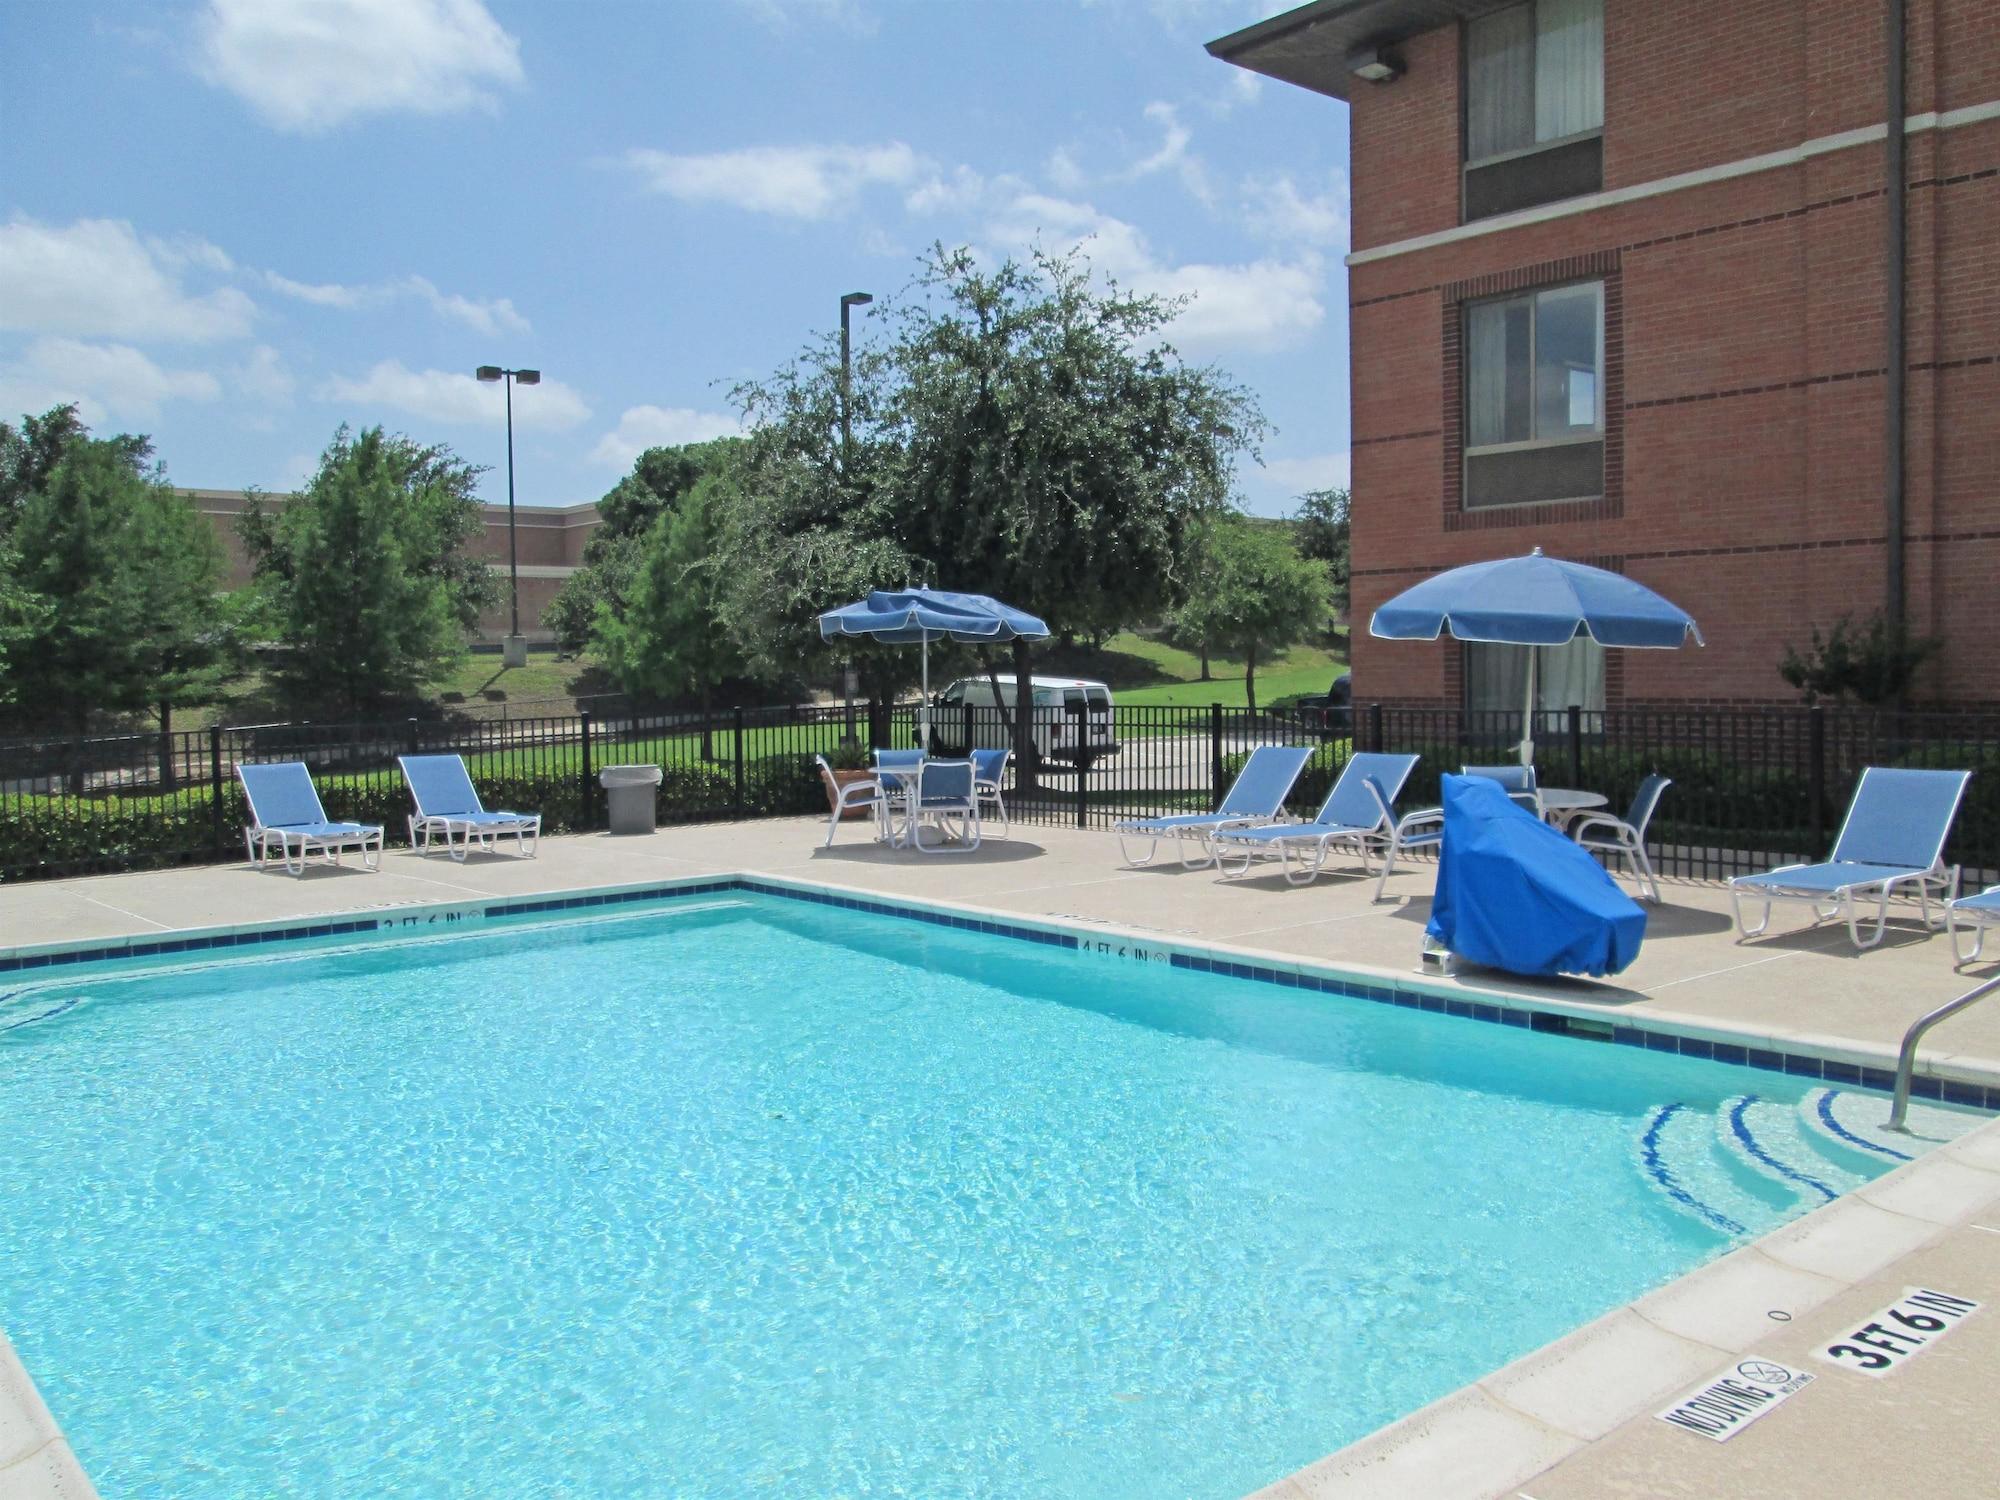 Extended Stay America - Fort Worth - Southwest